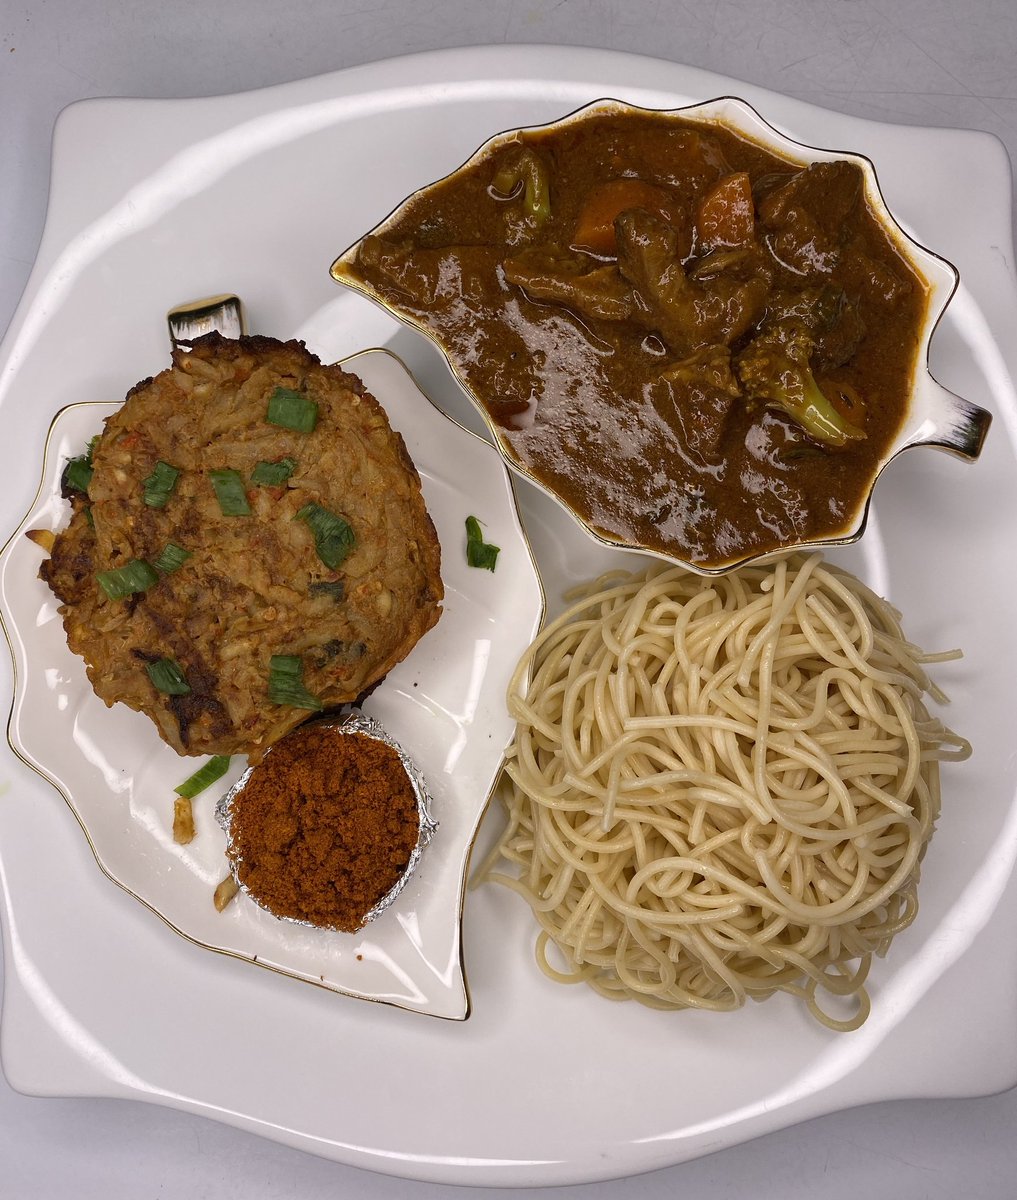 Day 25: White spaghetti with beef gravy, classic potato pancakes and fruits